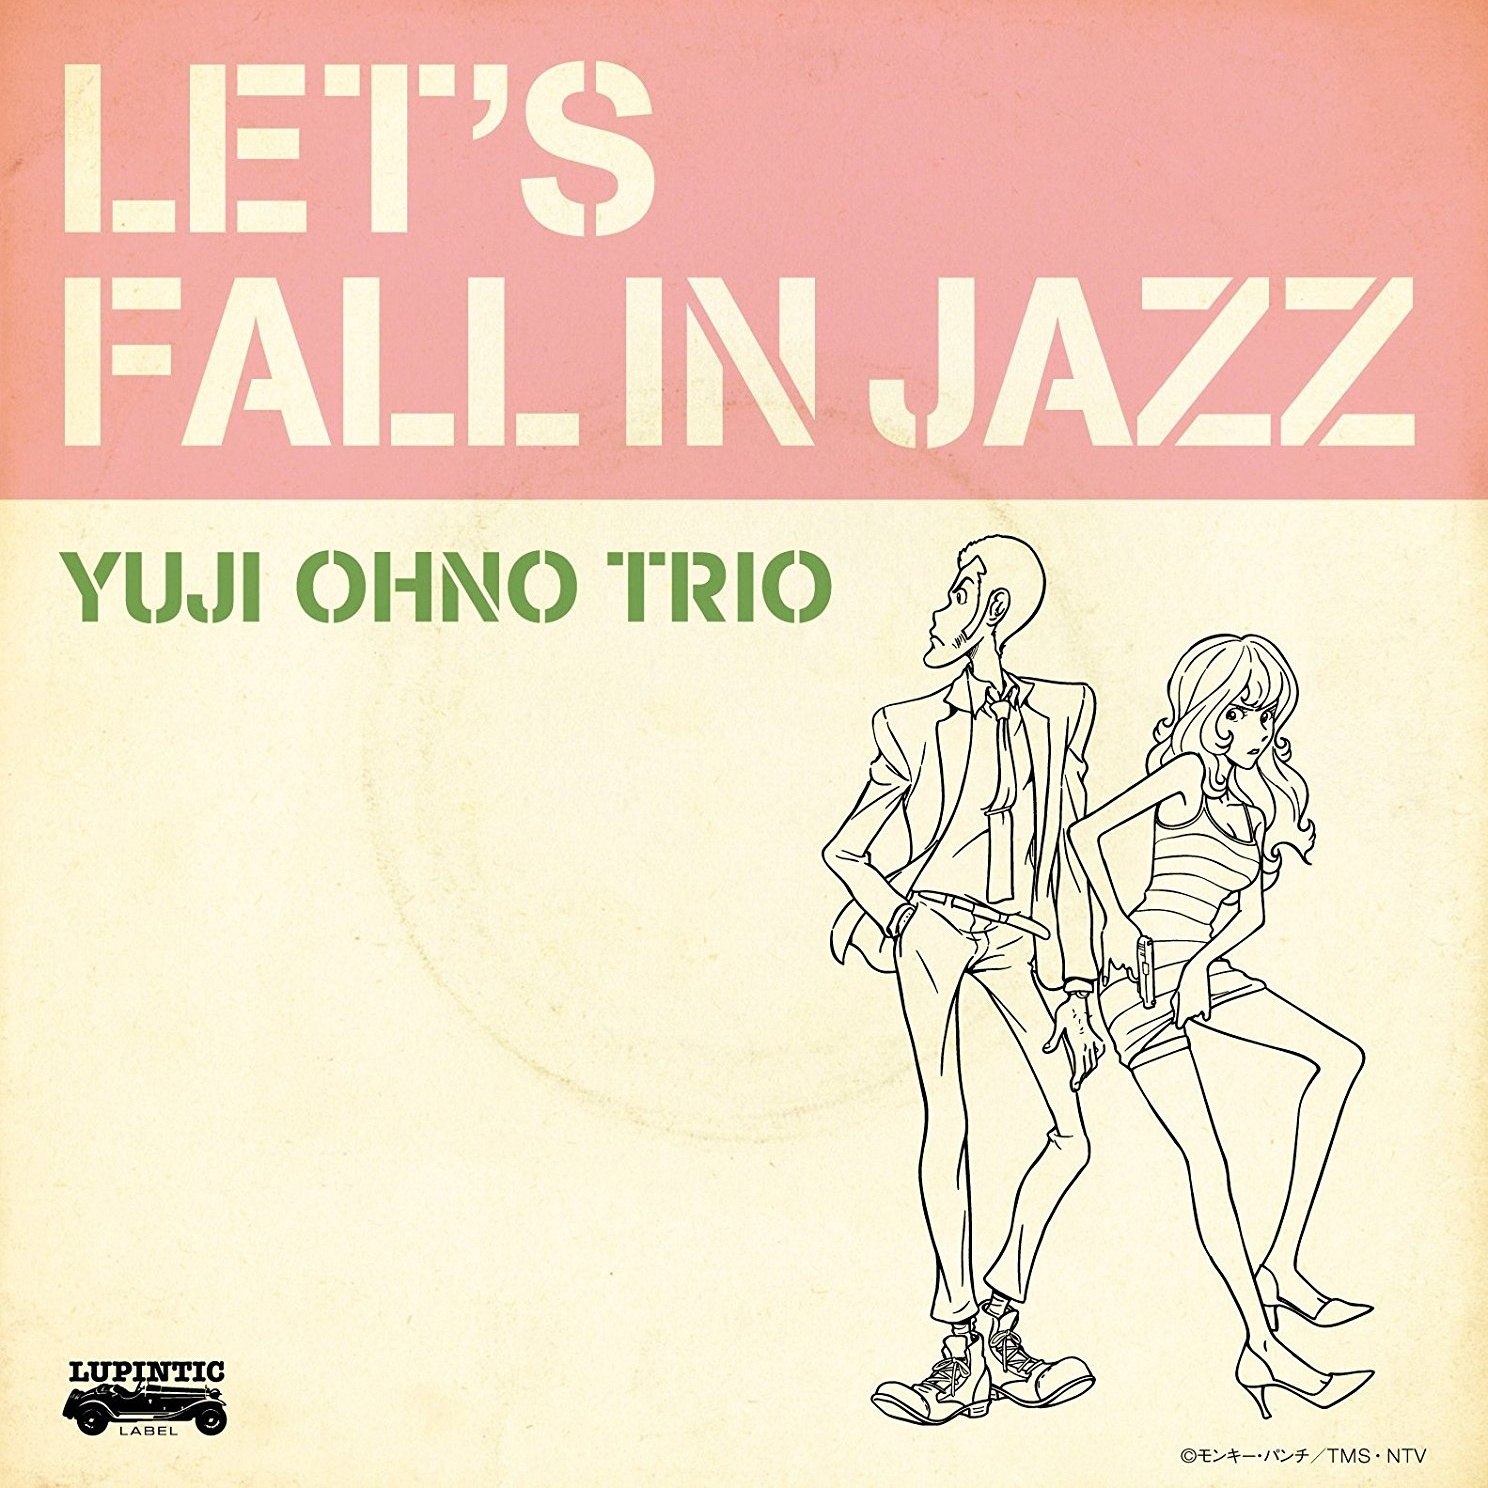 LET'S FALL IN JAZZ